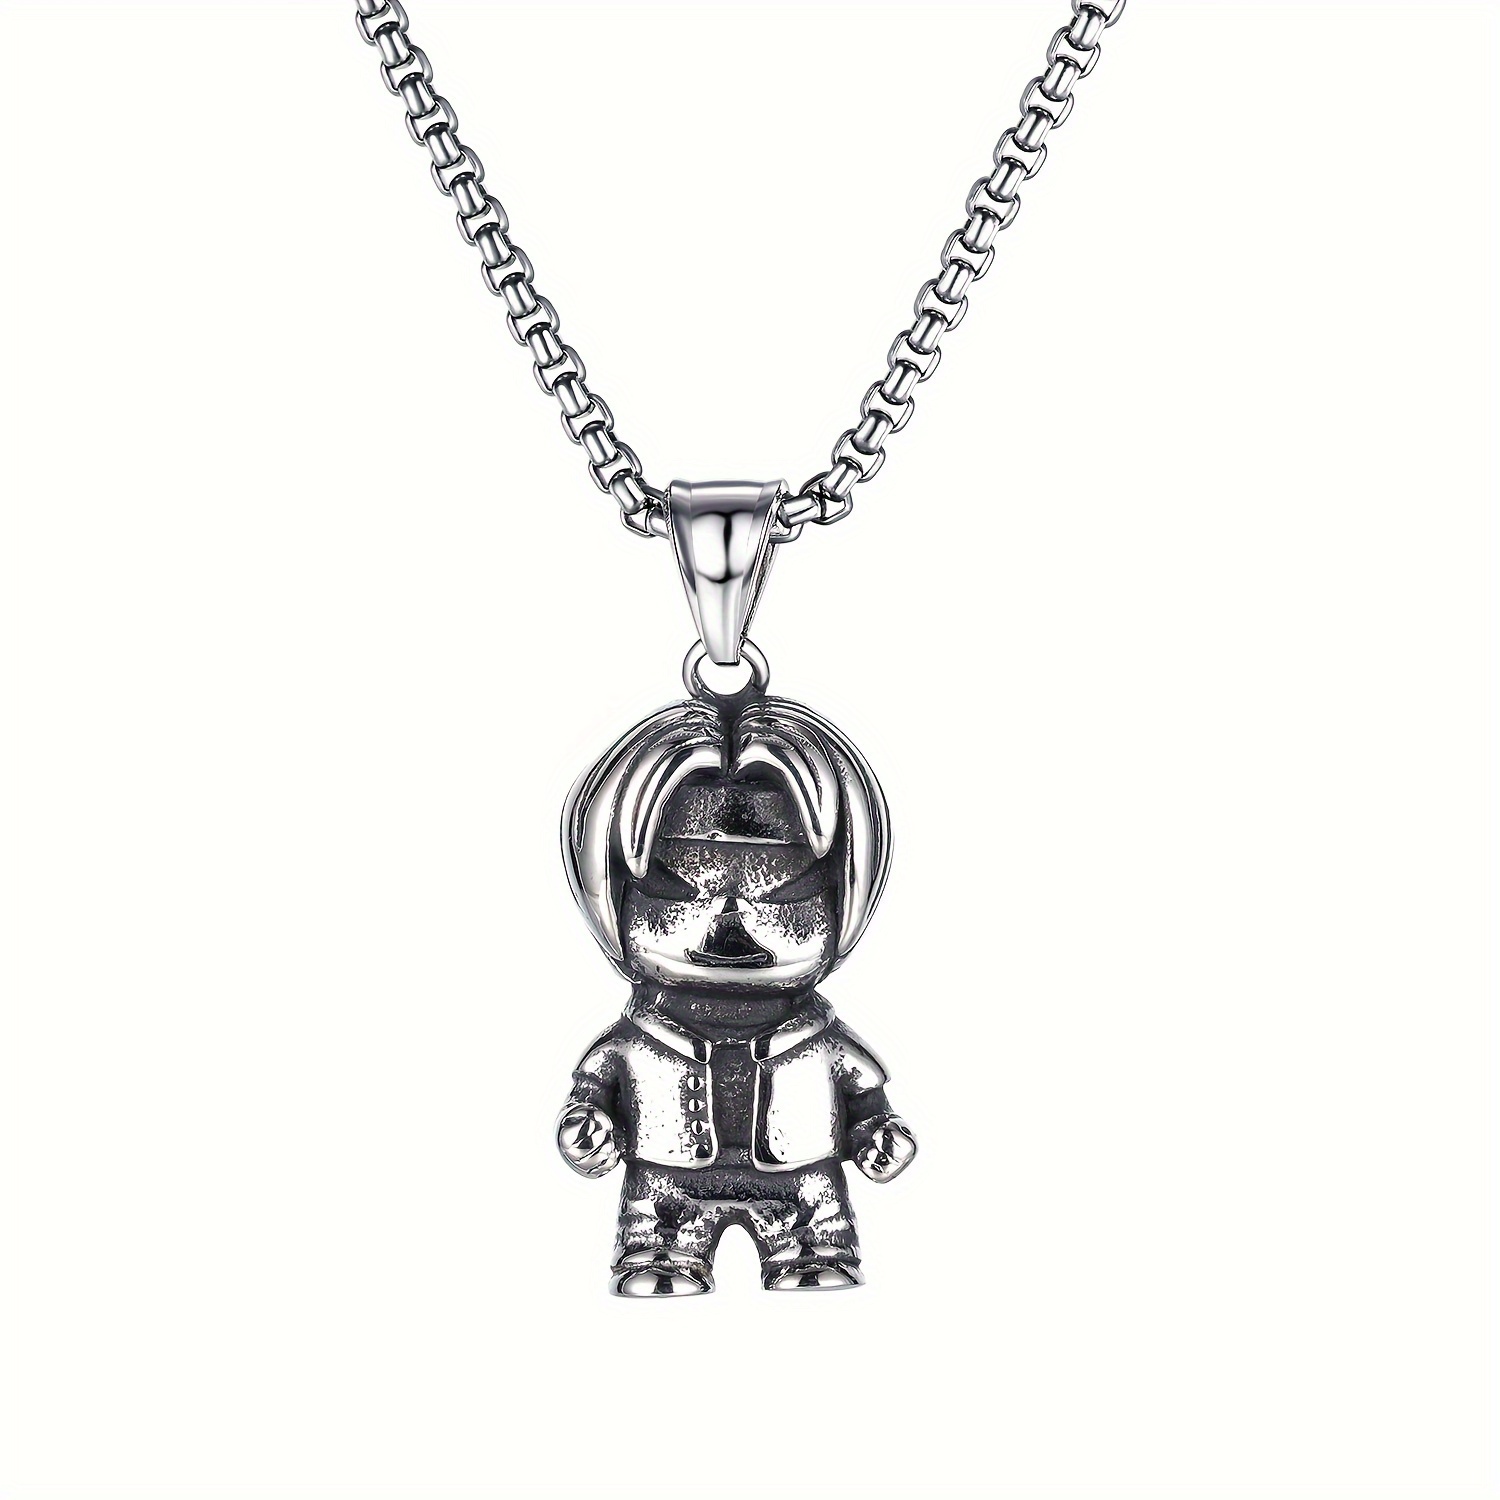 1pc Stainless Steel Necklace With Cartoon Character Pendant For